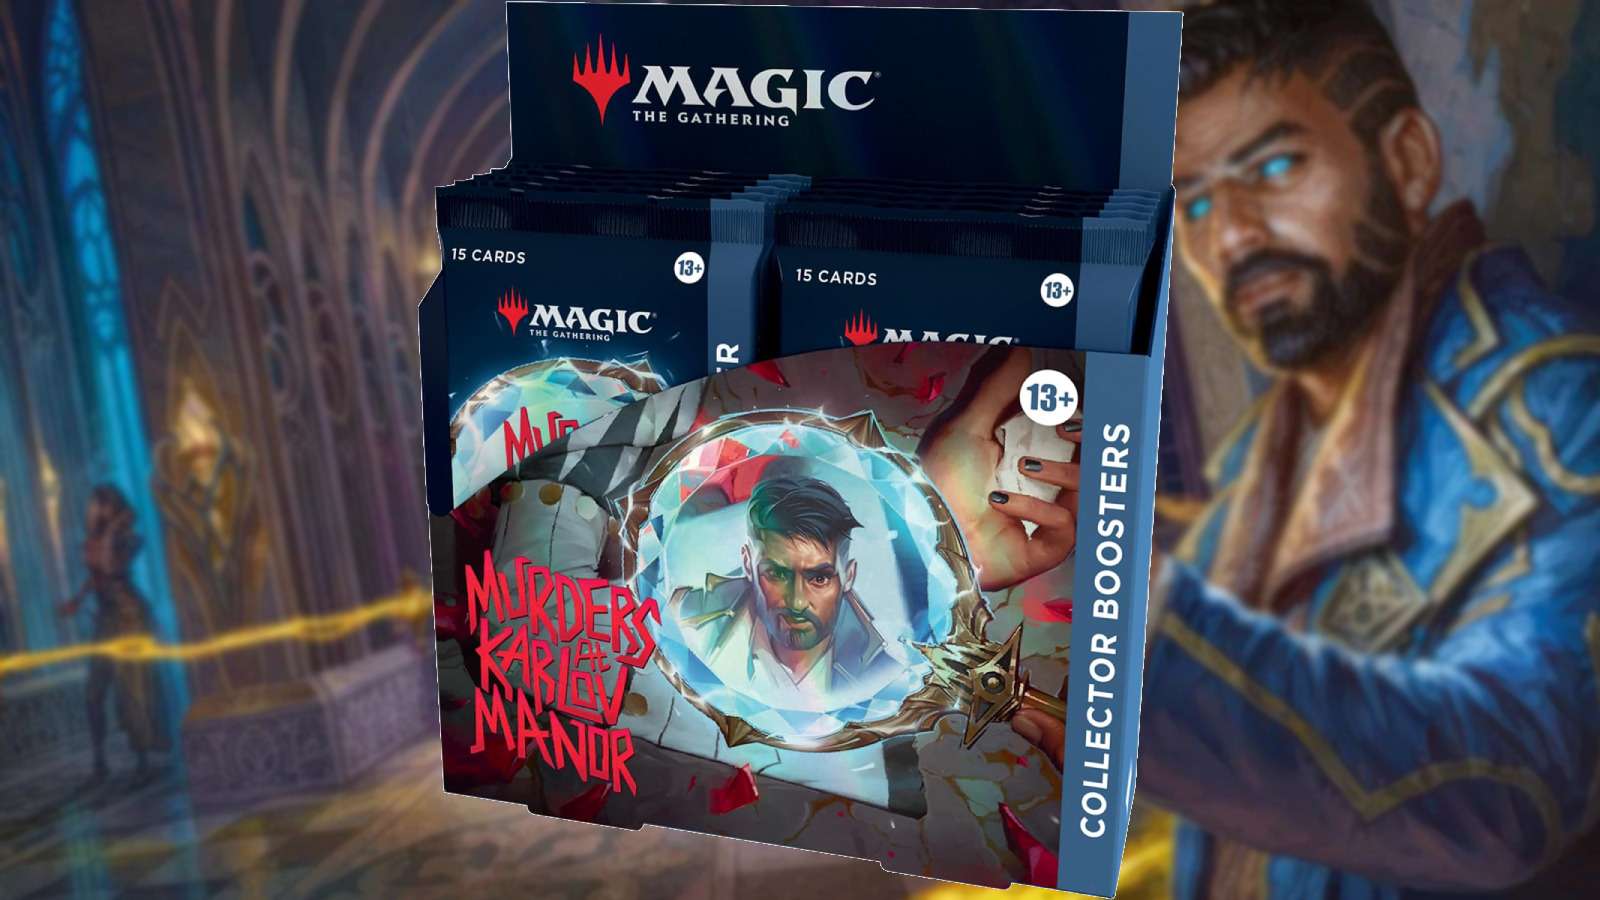 MTG Karlov Manor collector boosters and background